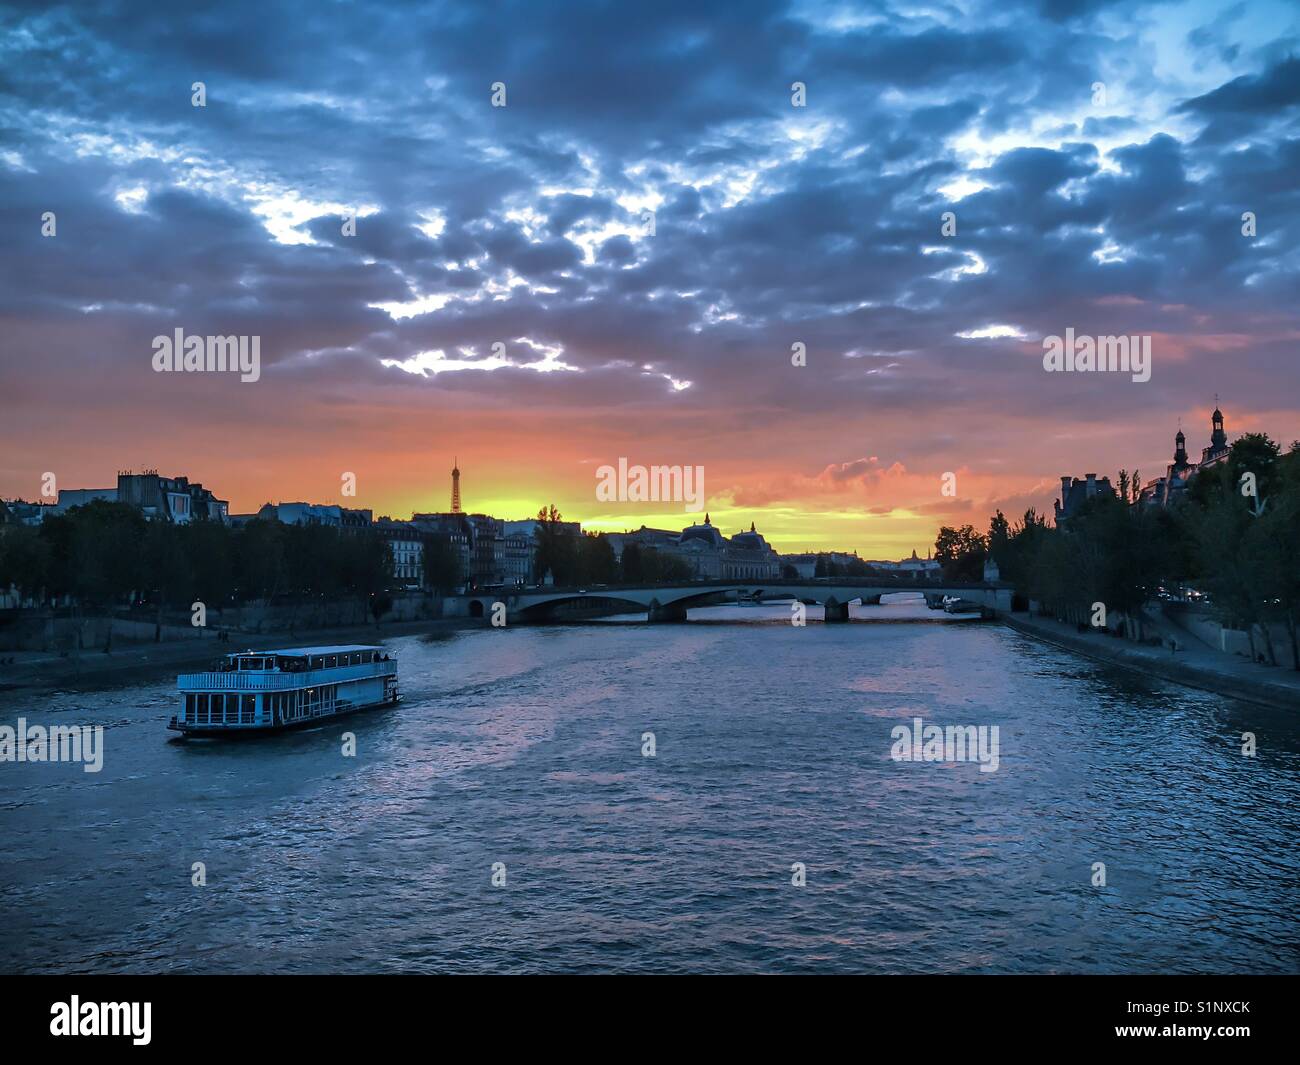 Sunset on the River Seine. Stock Photo